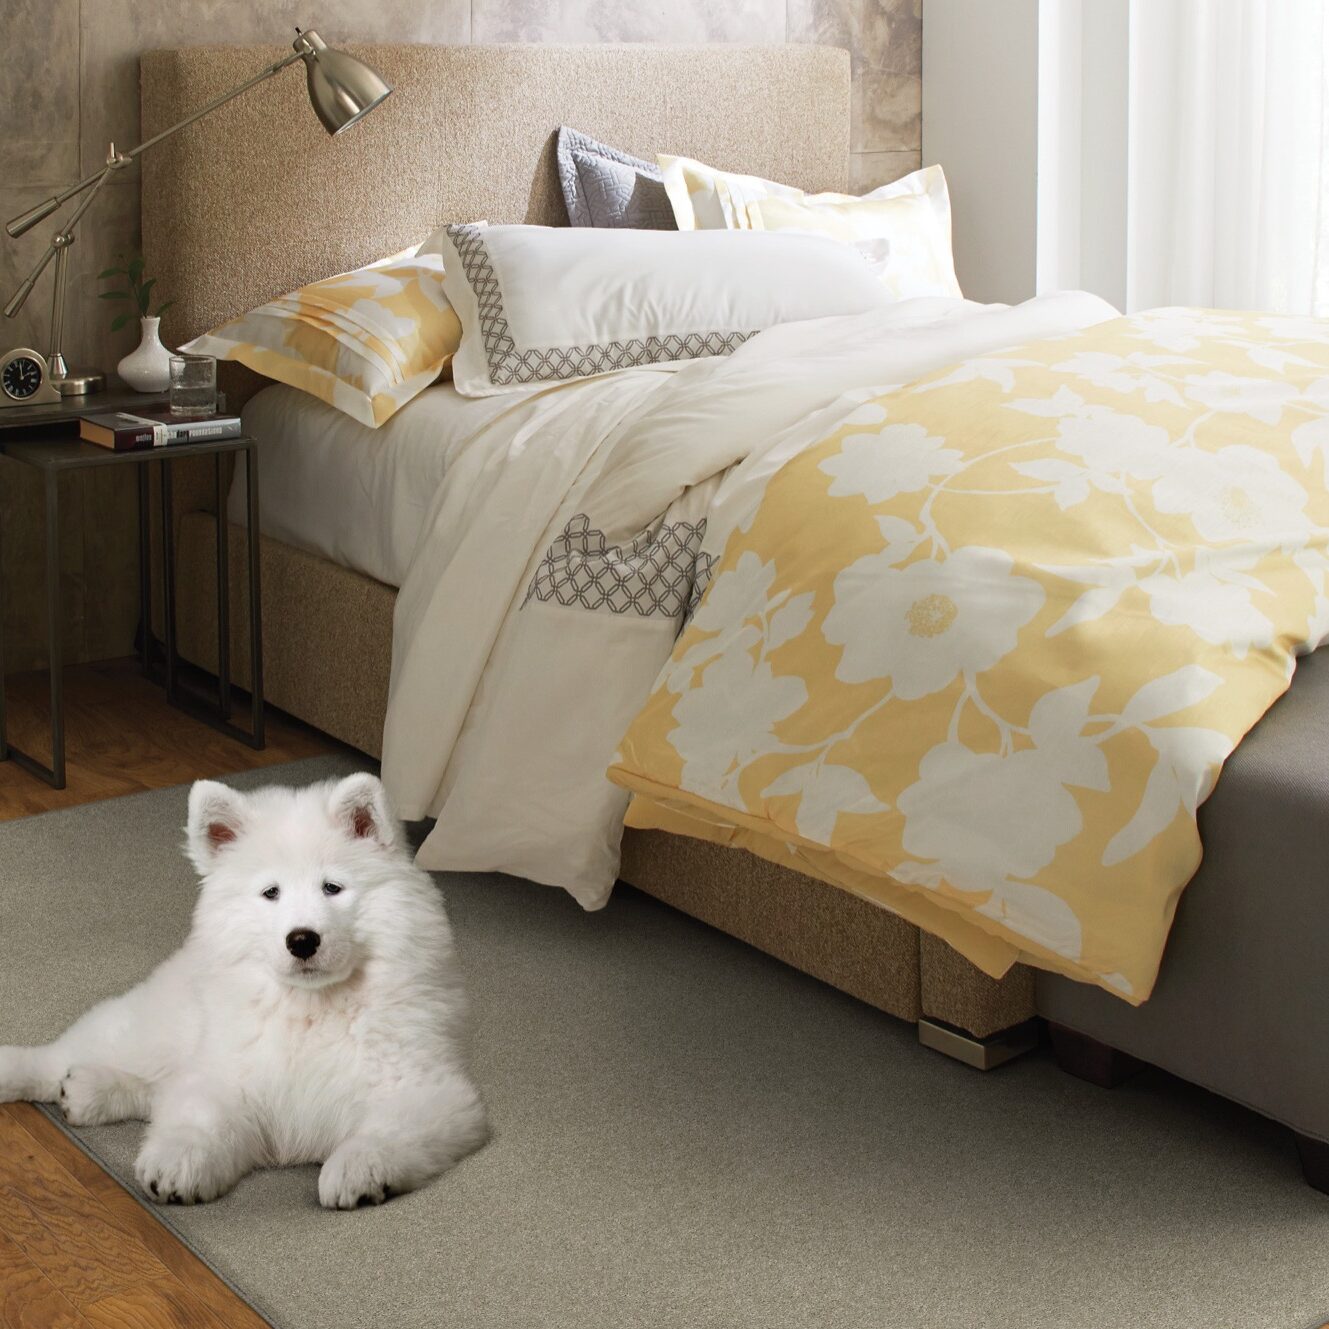 Bed vignette with dog laying down on rug | Custom Floor & Design